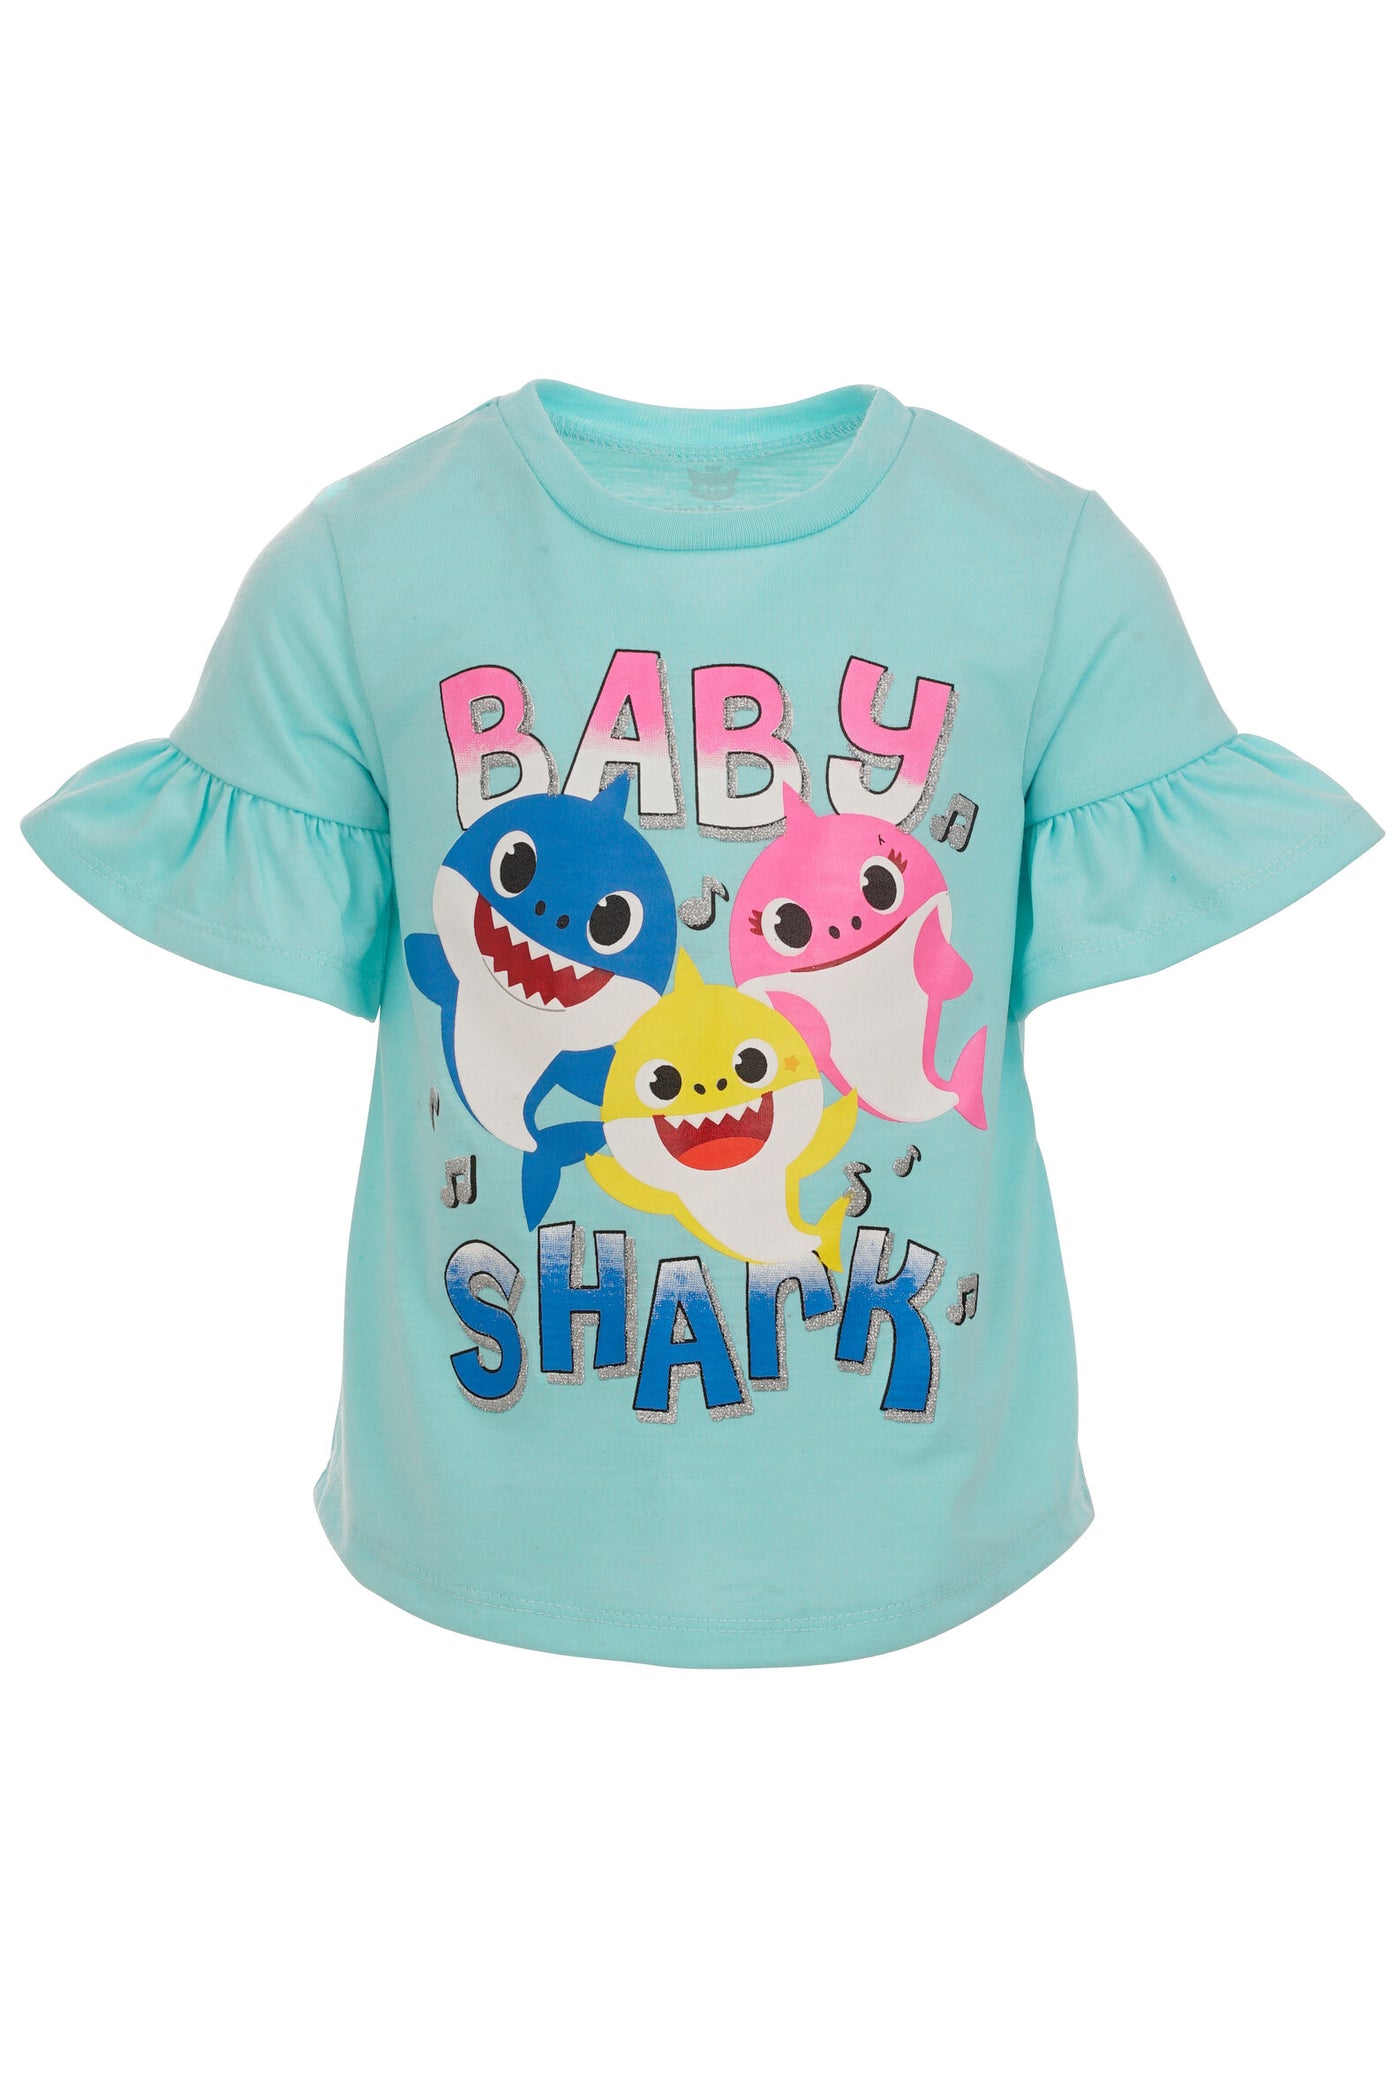 Pinkfong Baby Shark T-Shirt and Leggings Outfit Set